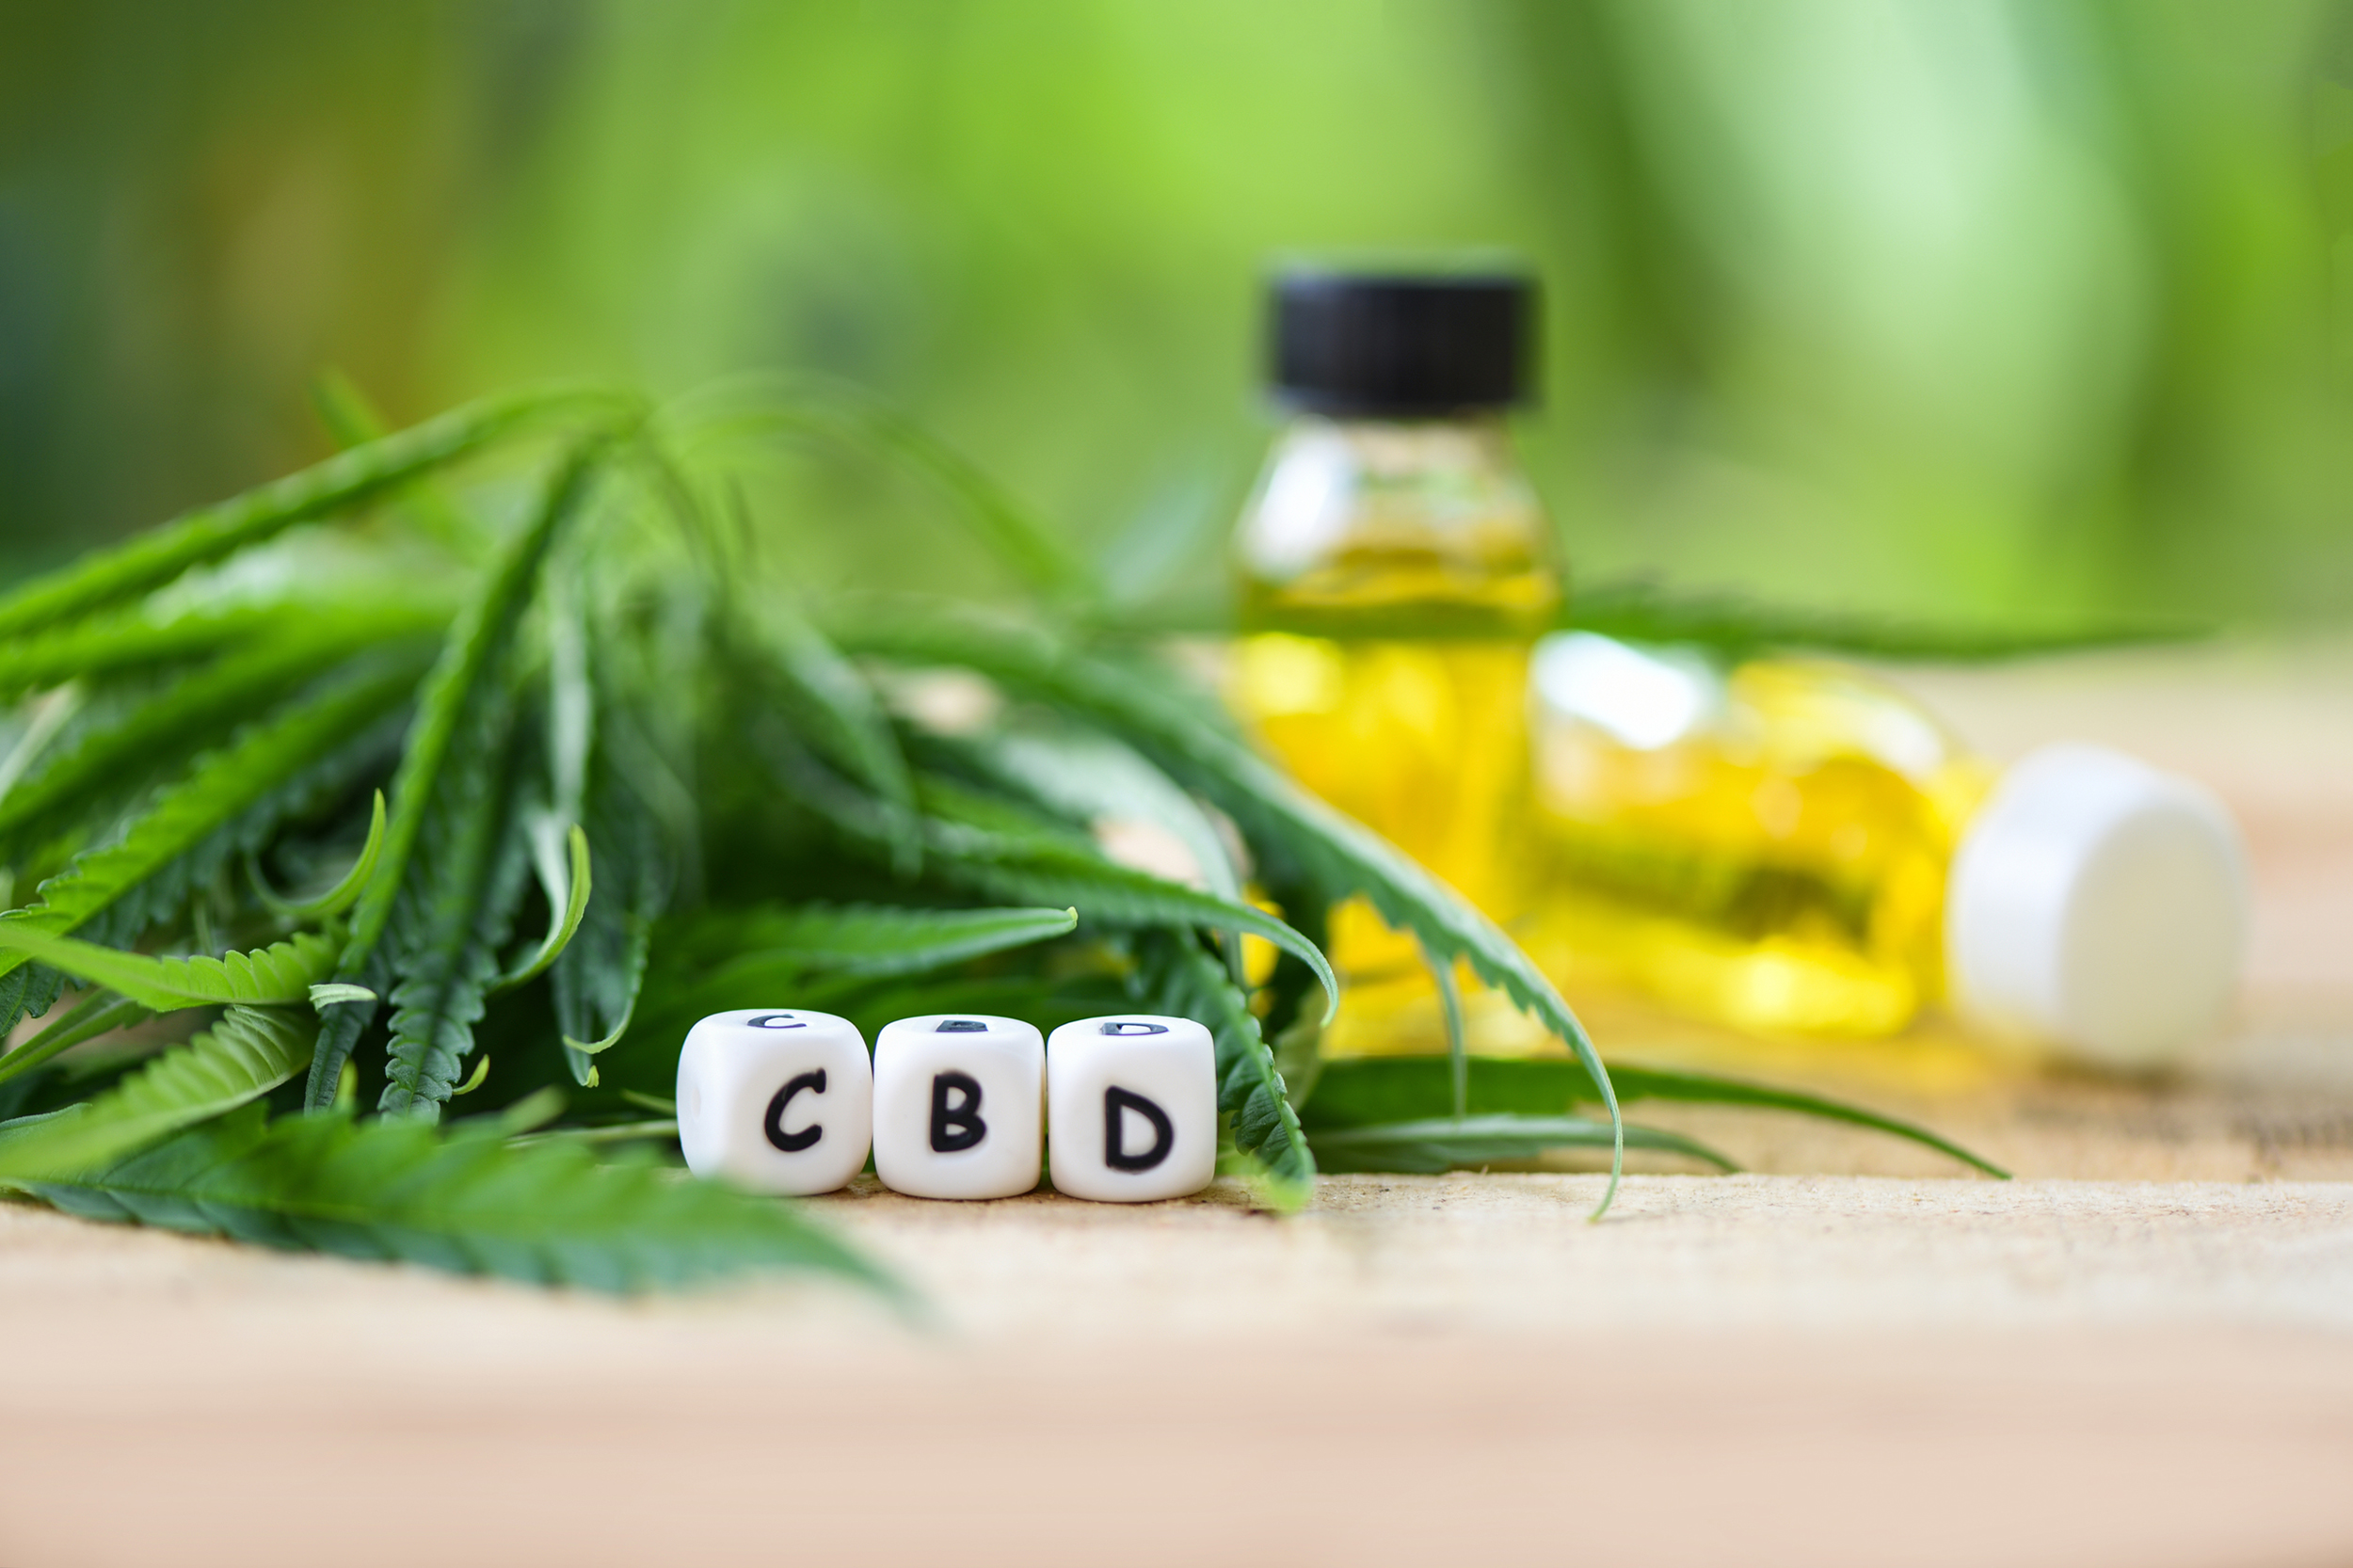 FDA says no to CBD oil as dietary supplement